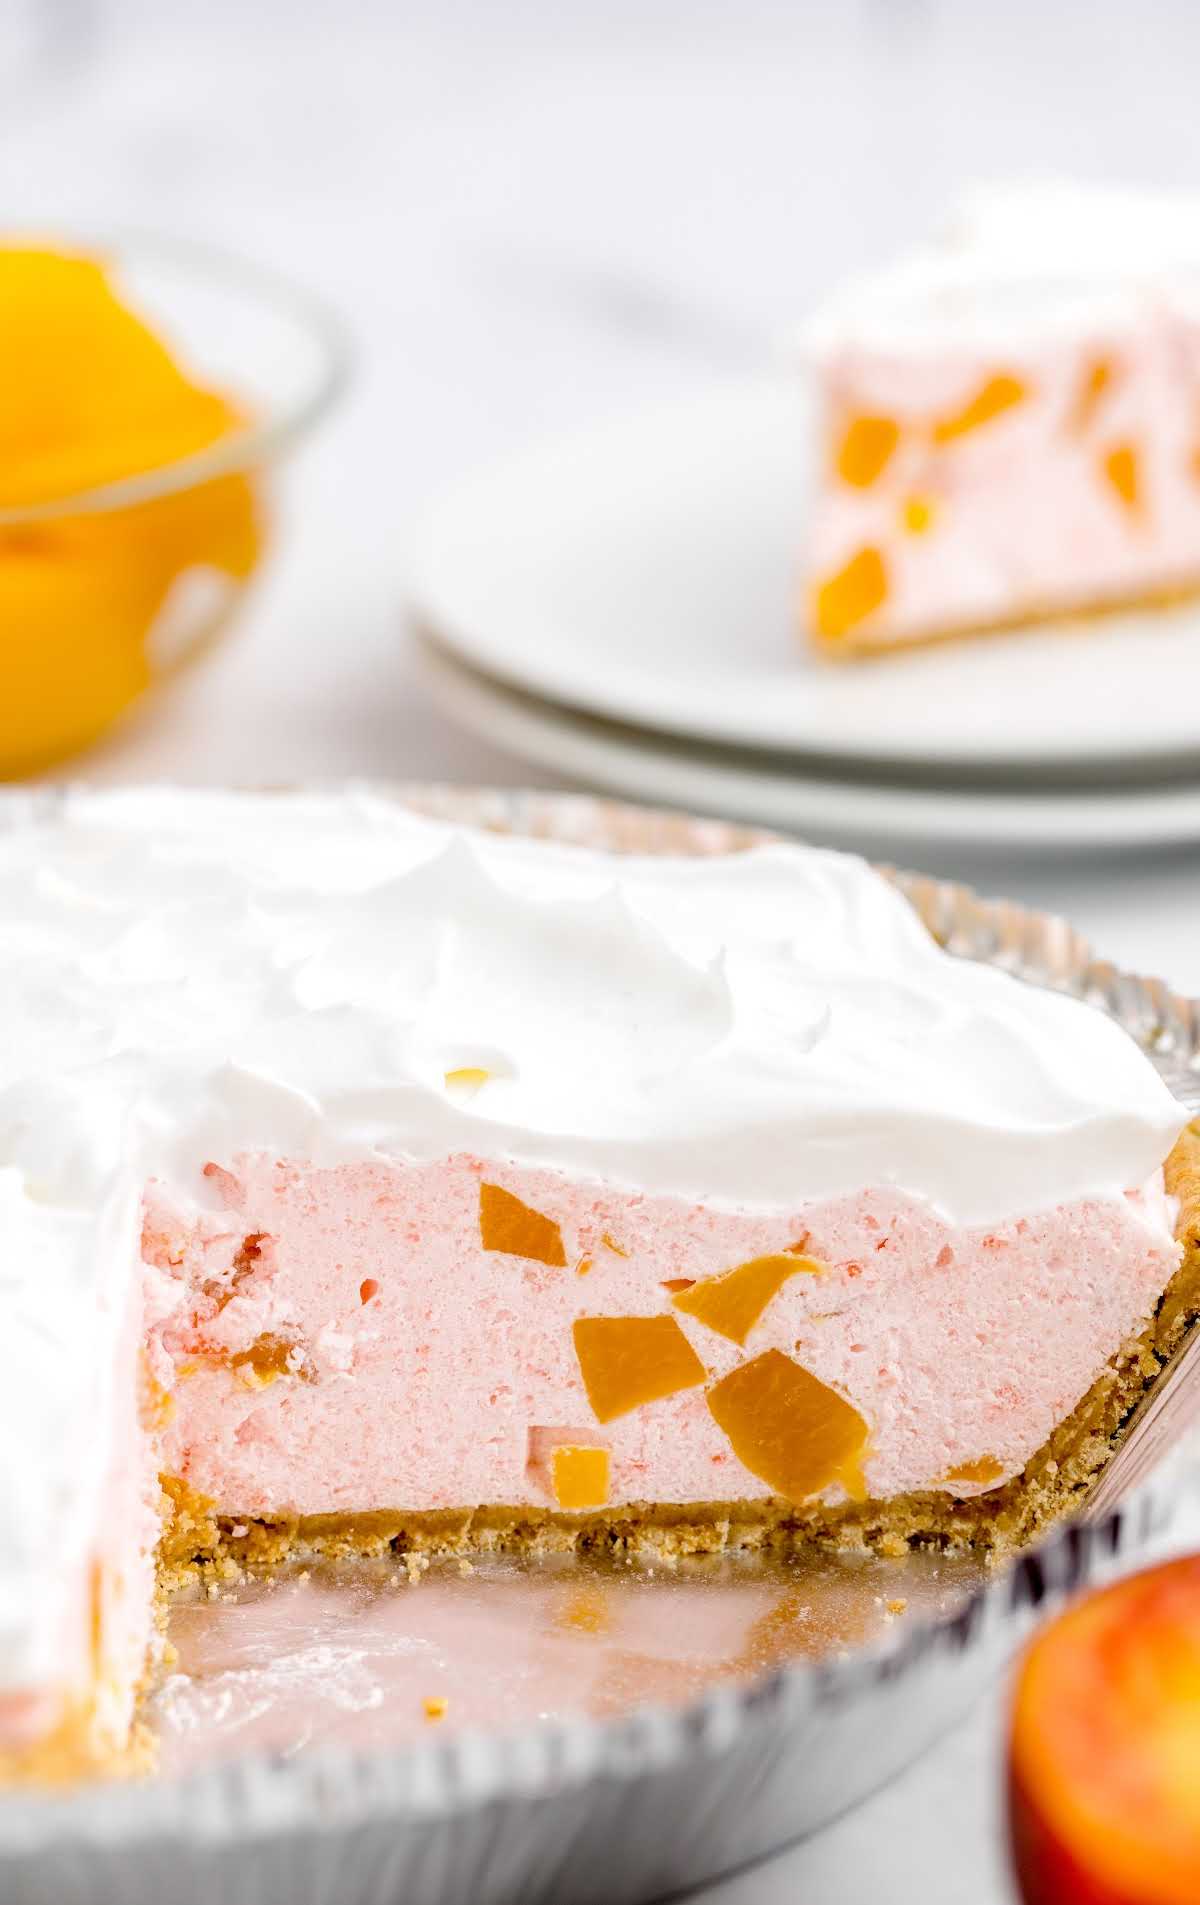 A piece of cake on a paper plate, with Peach and Cool Whip